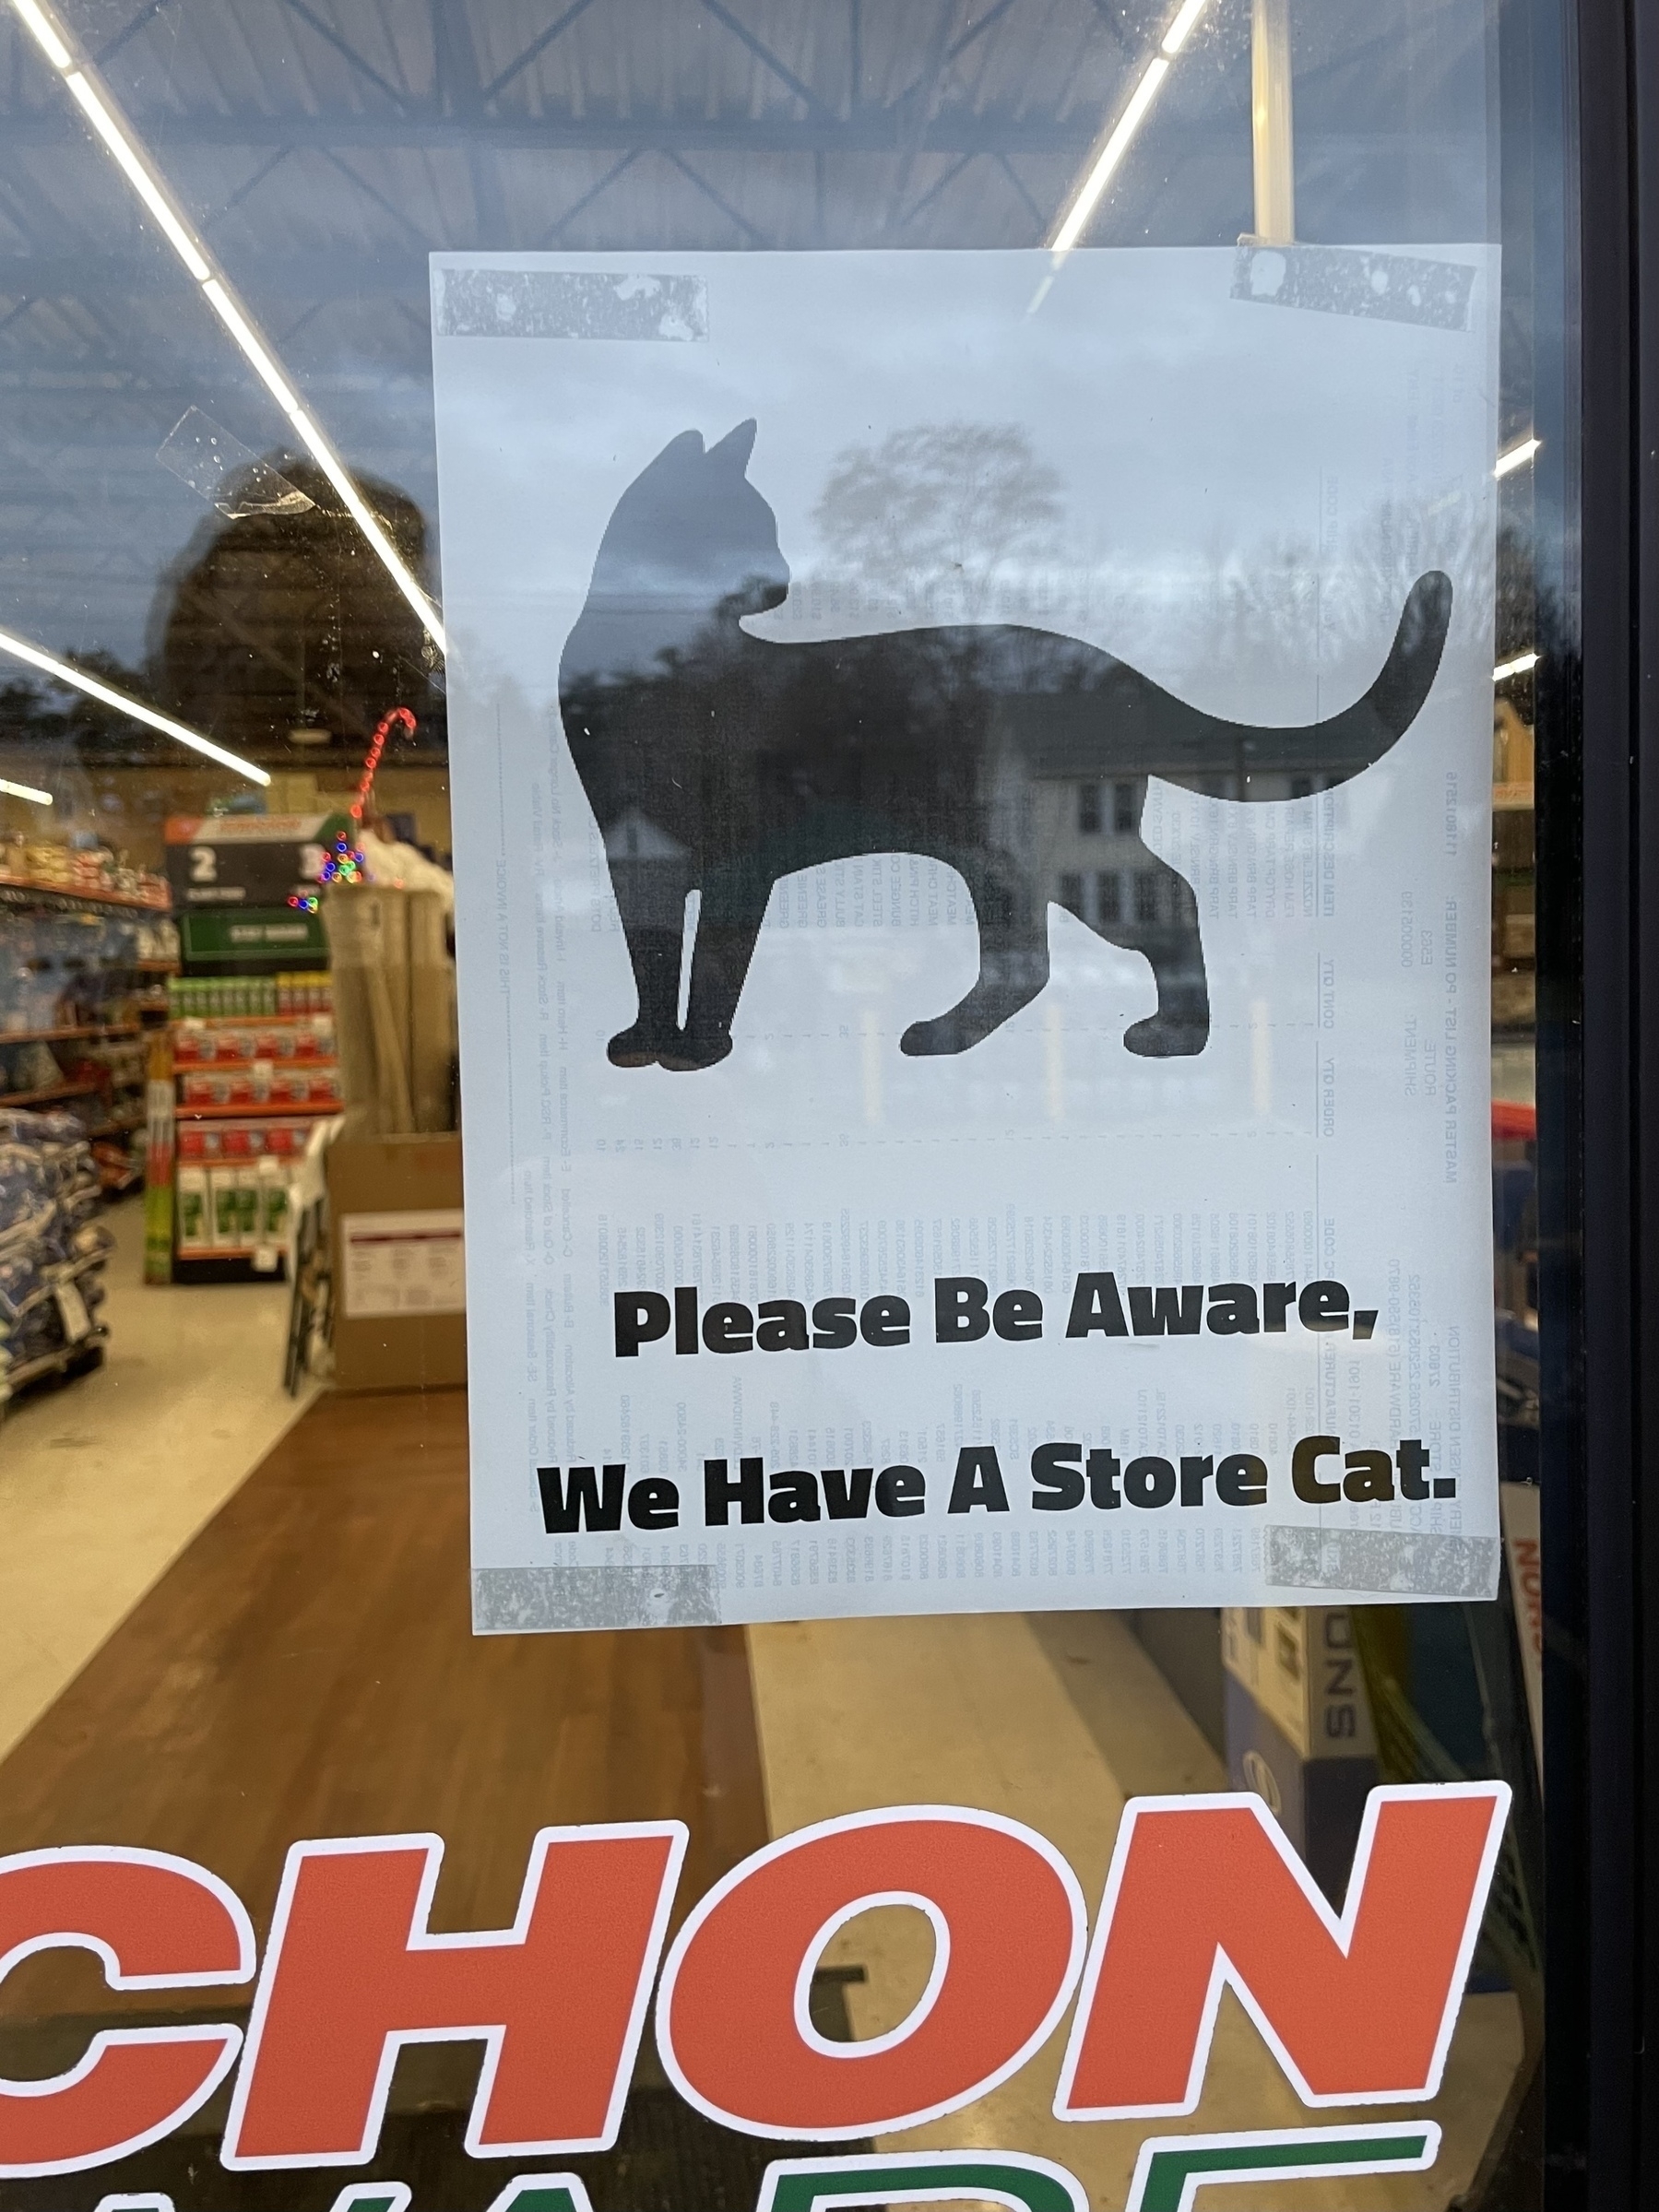 A sign about the store cat at Aubuchons Hardware